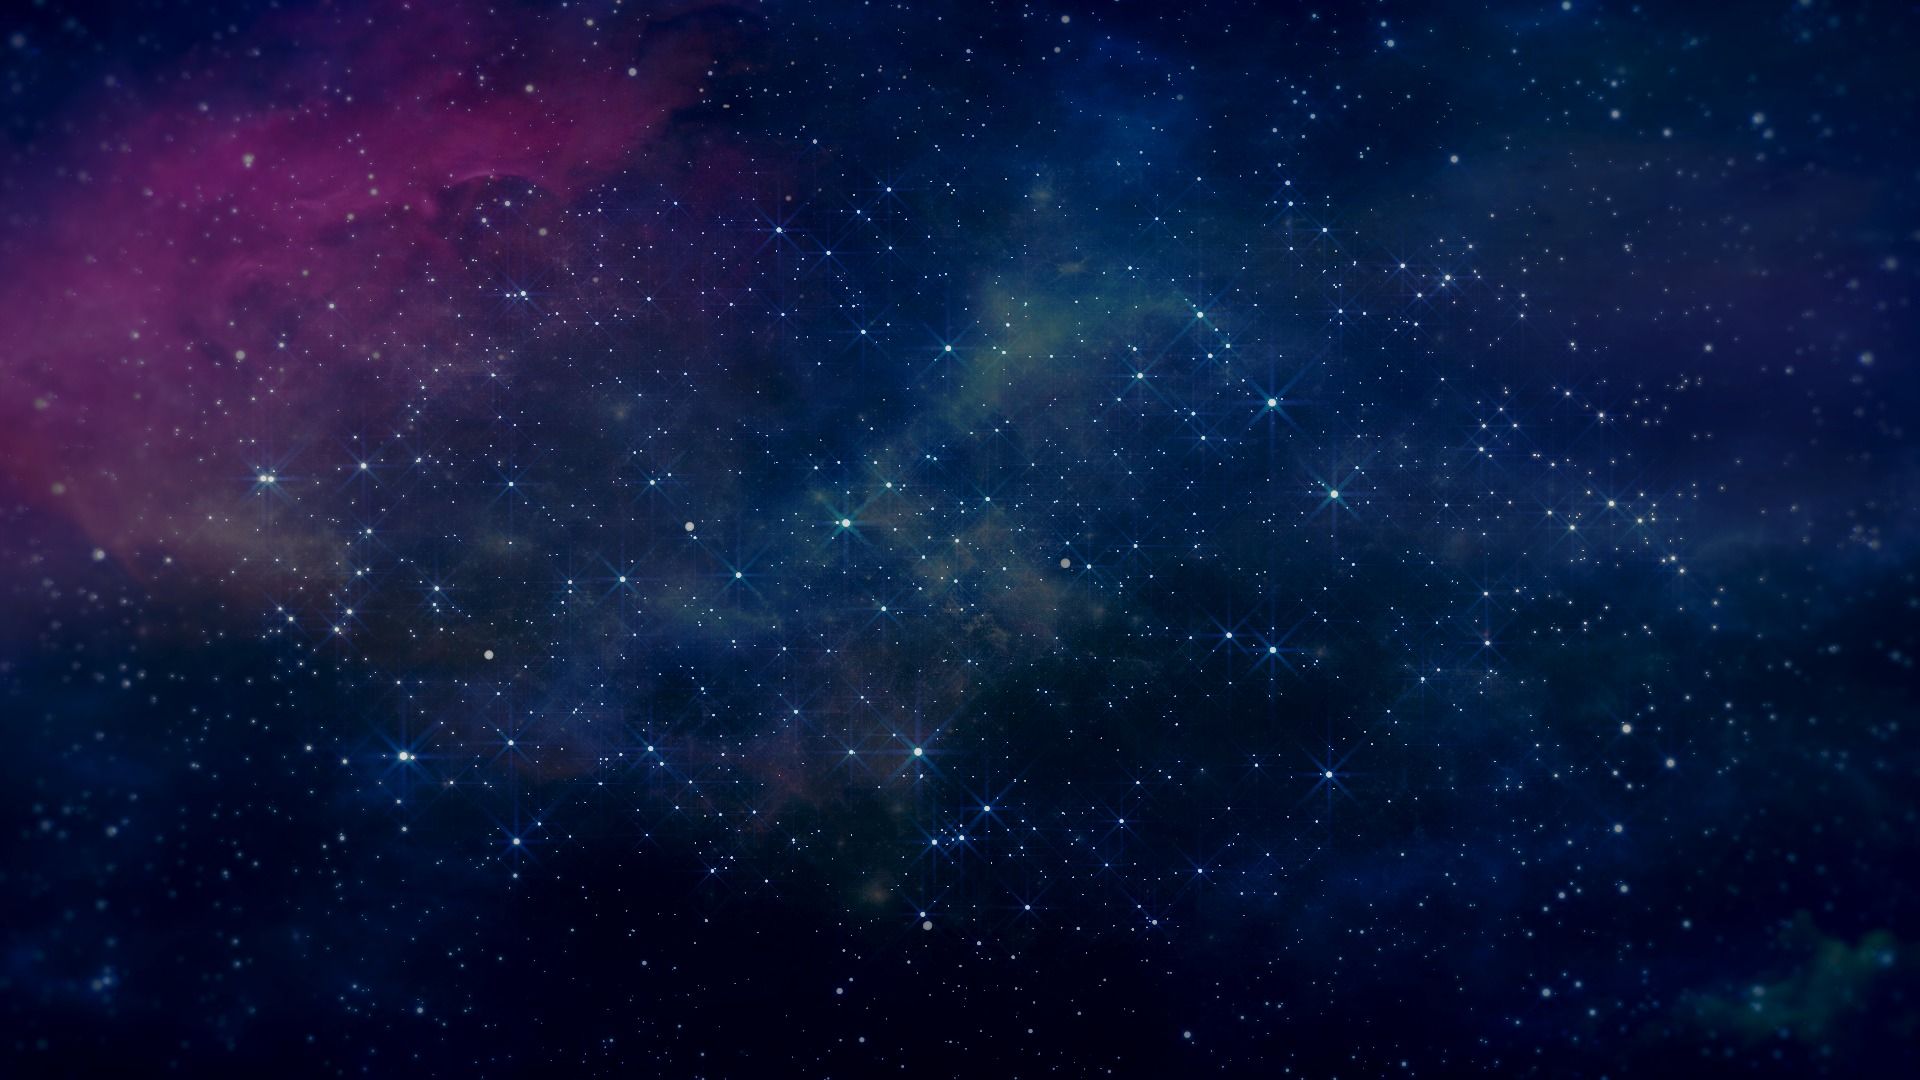 My Space Wallpapers